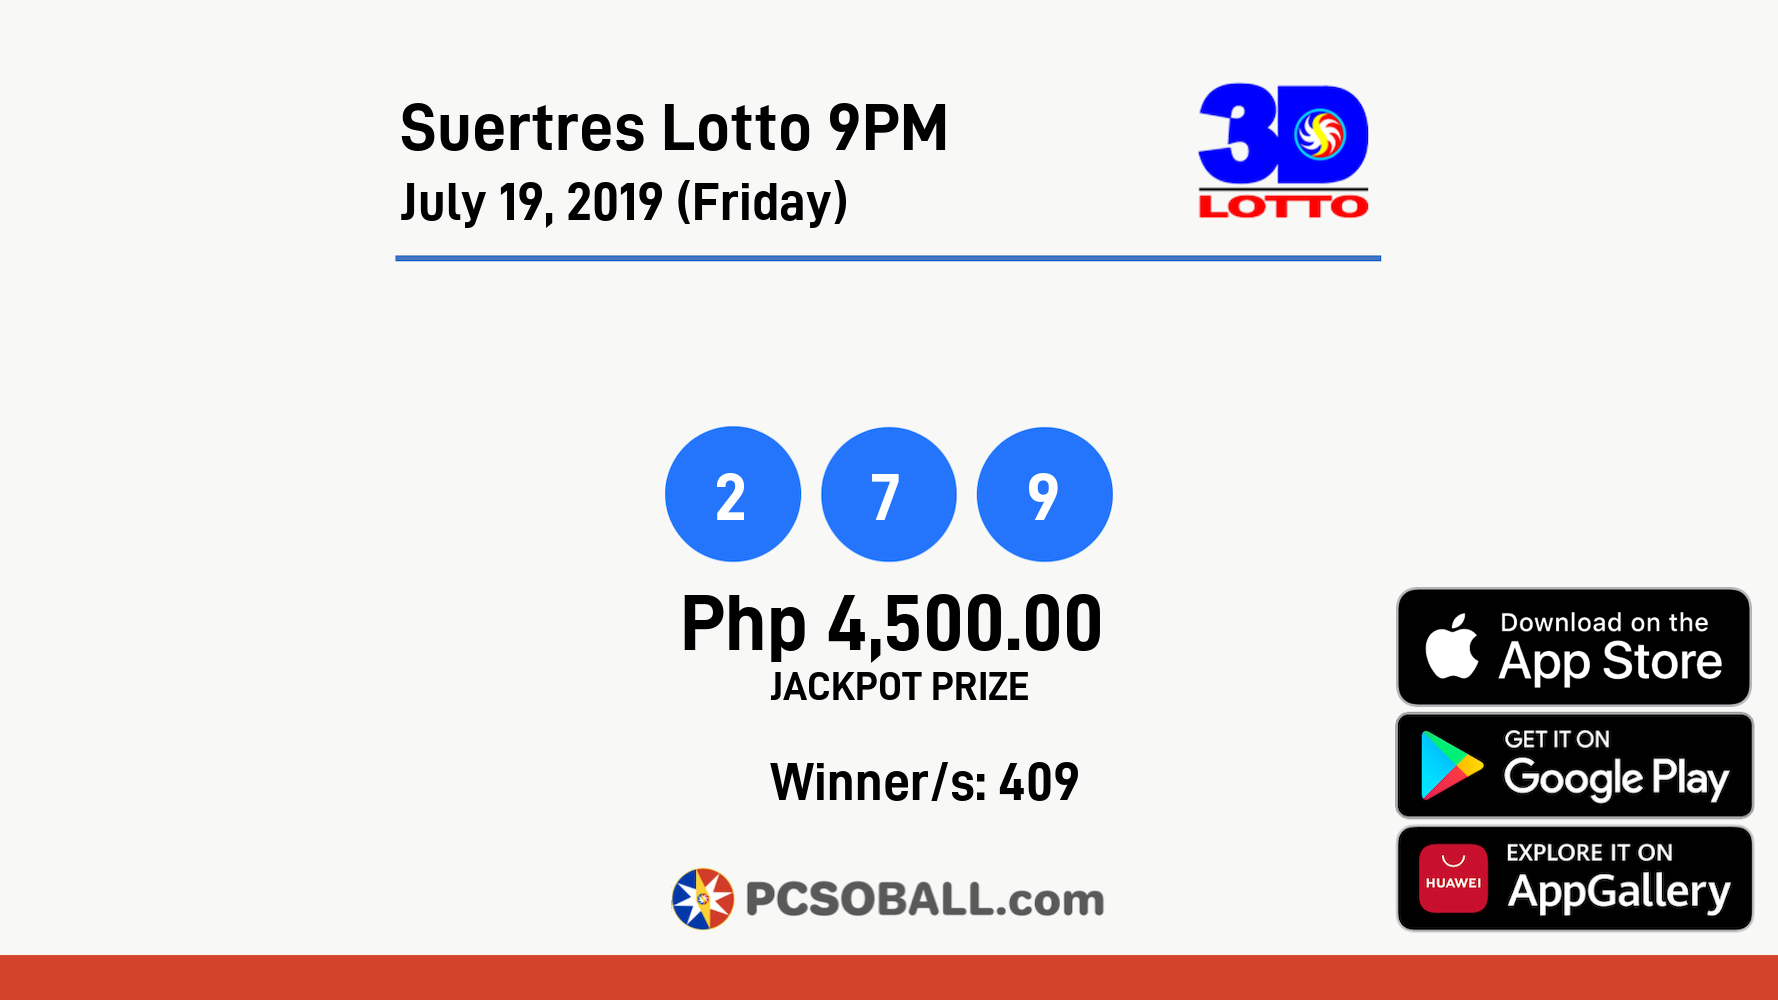 Suertres Lotto 9PM July 19, 2019 (Friday) Result